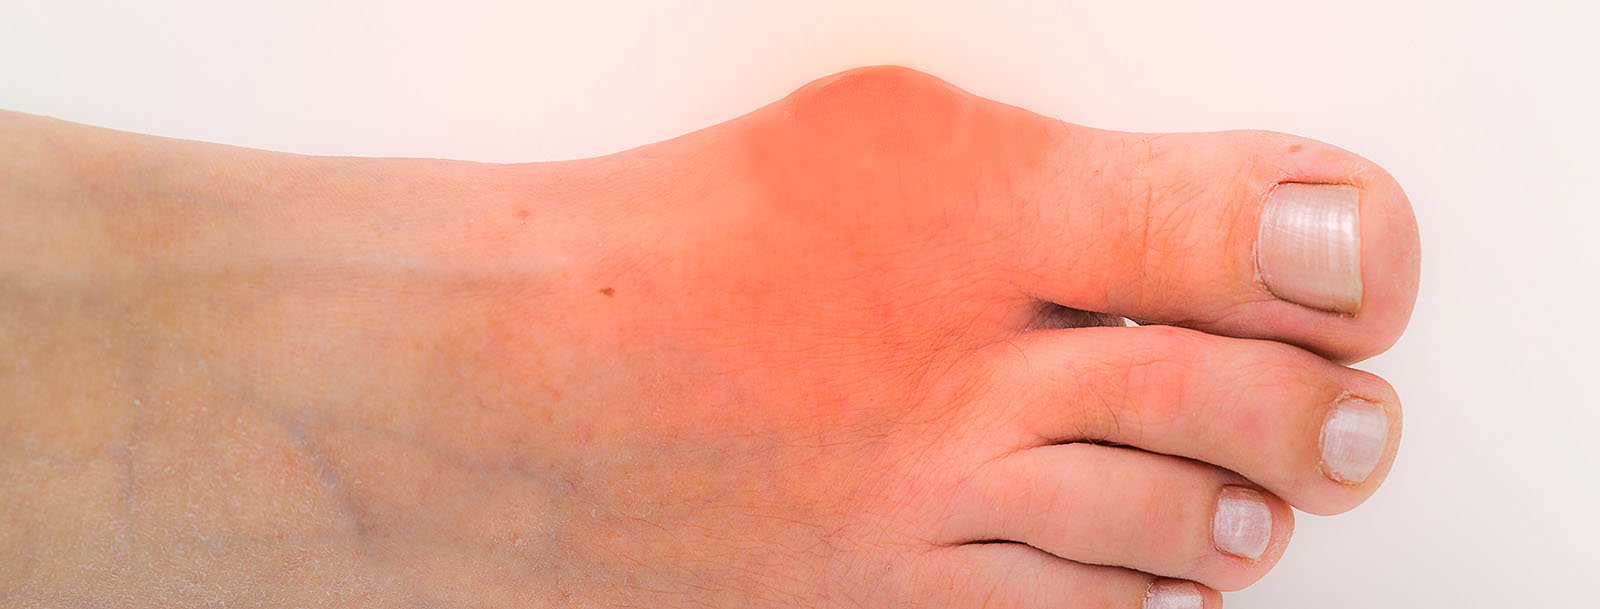 Gout Treatment and Gout Attack Pain Relief